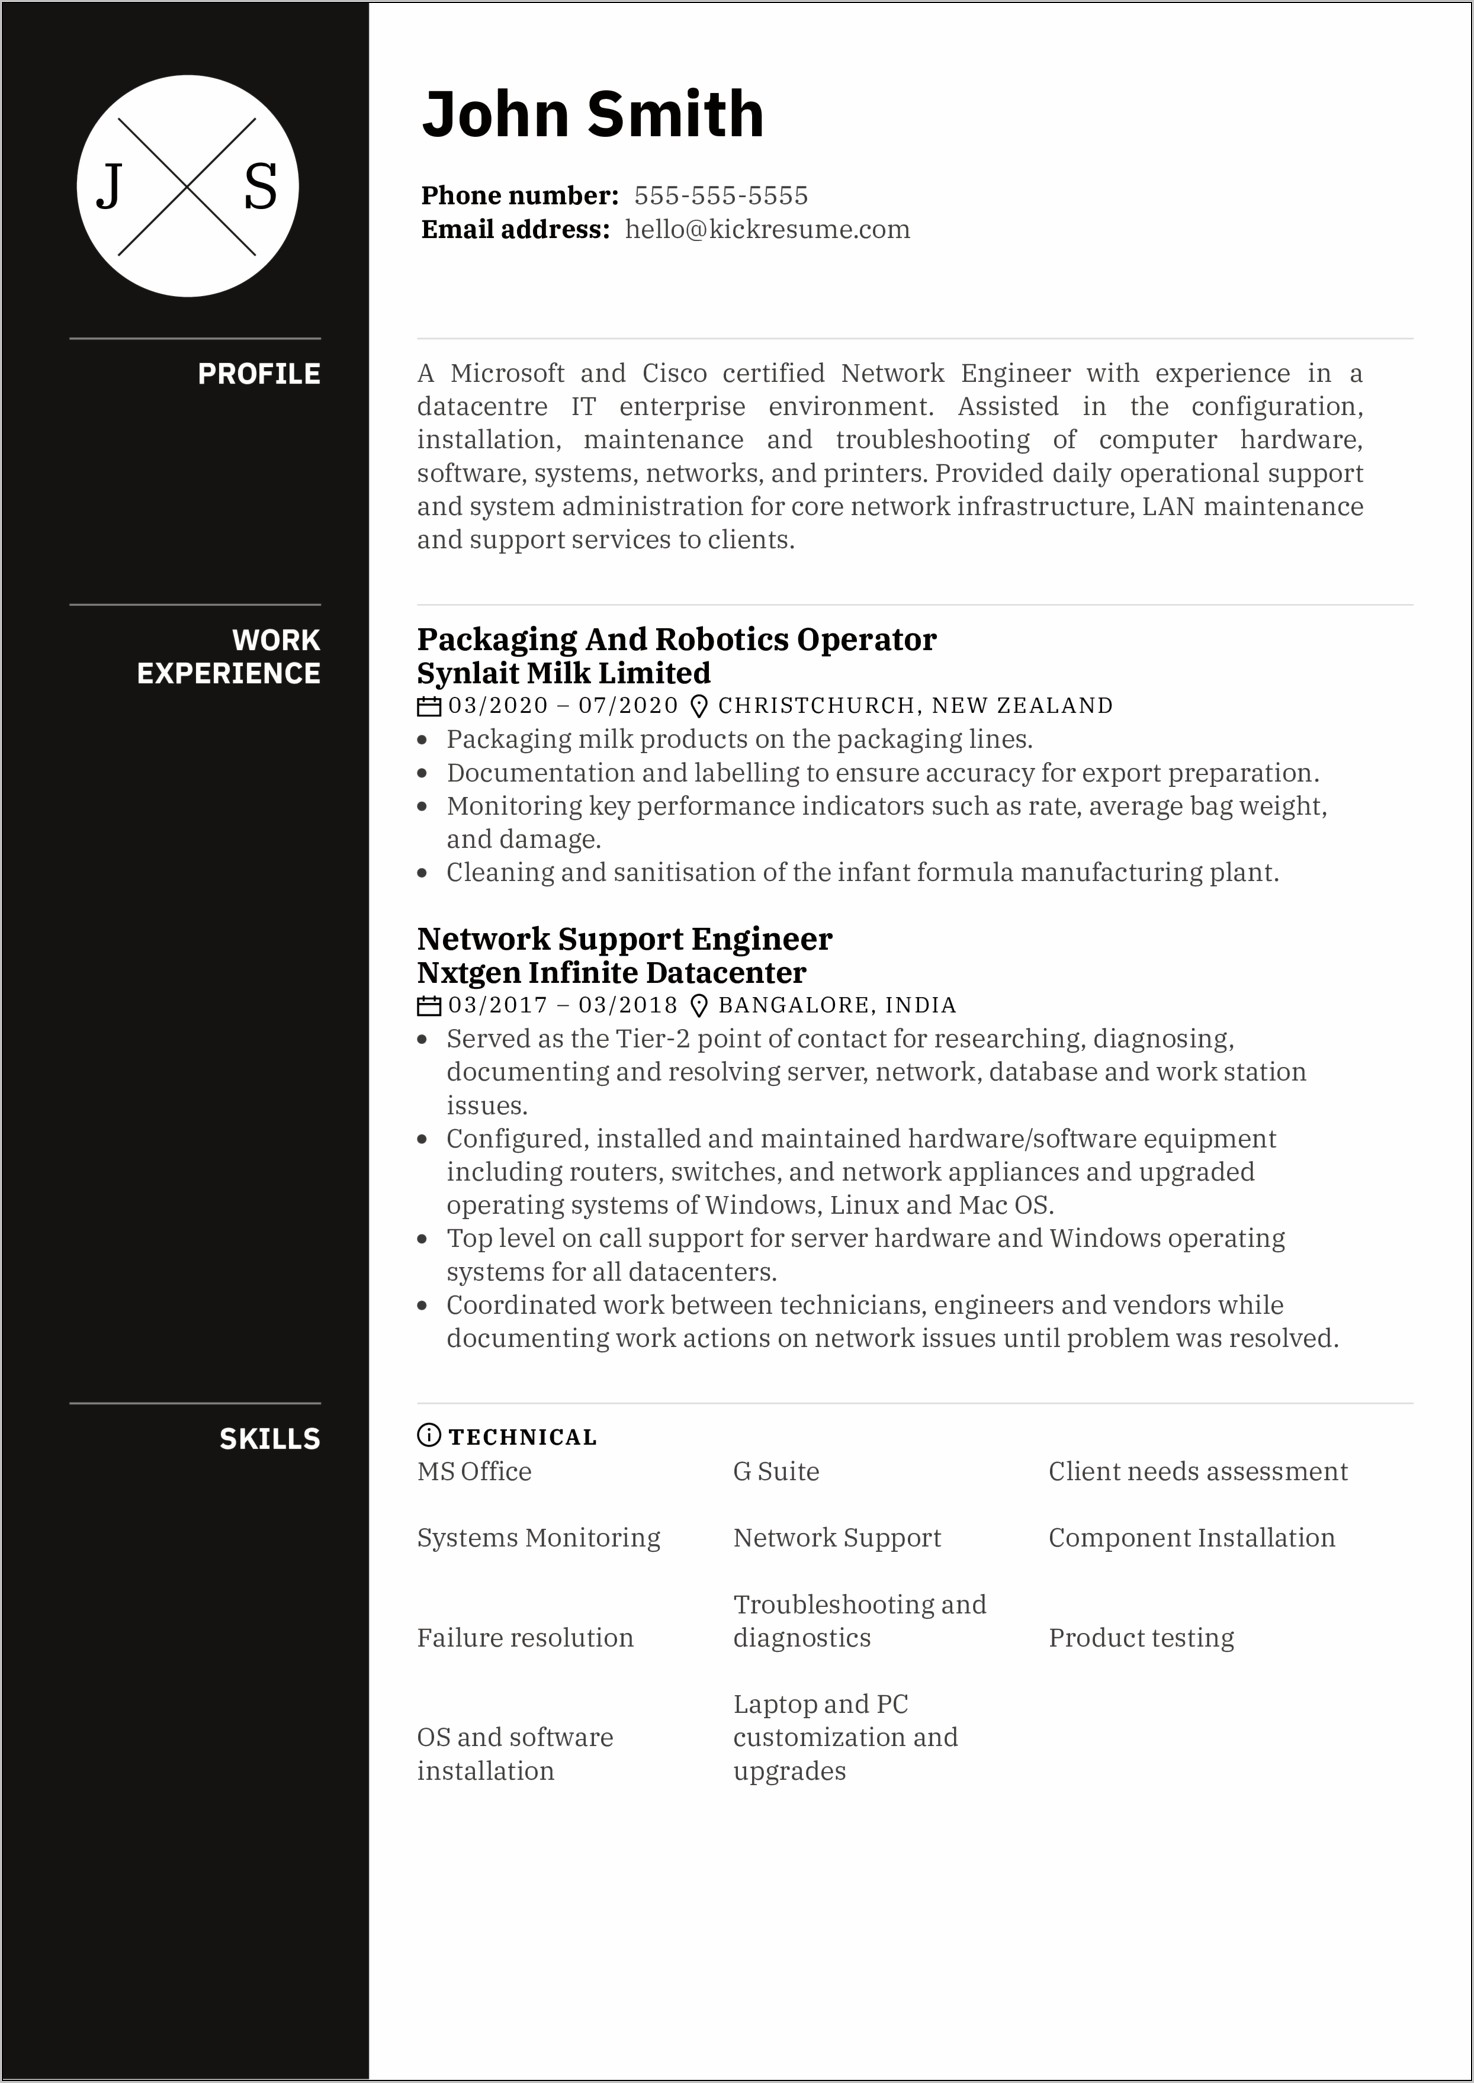 Computer Hardware And Networking Experience Resume Format